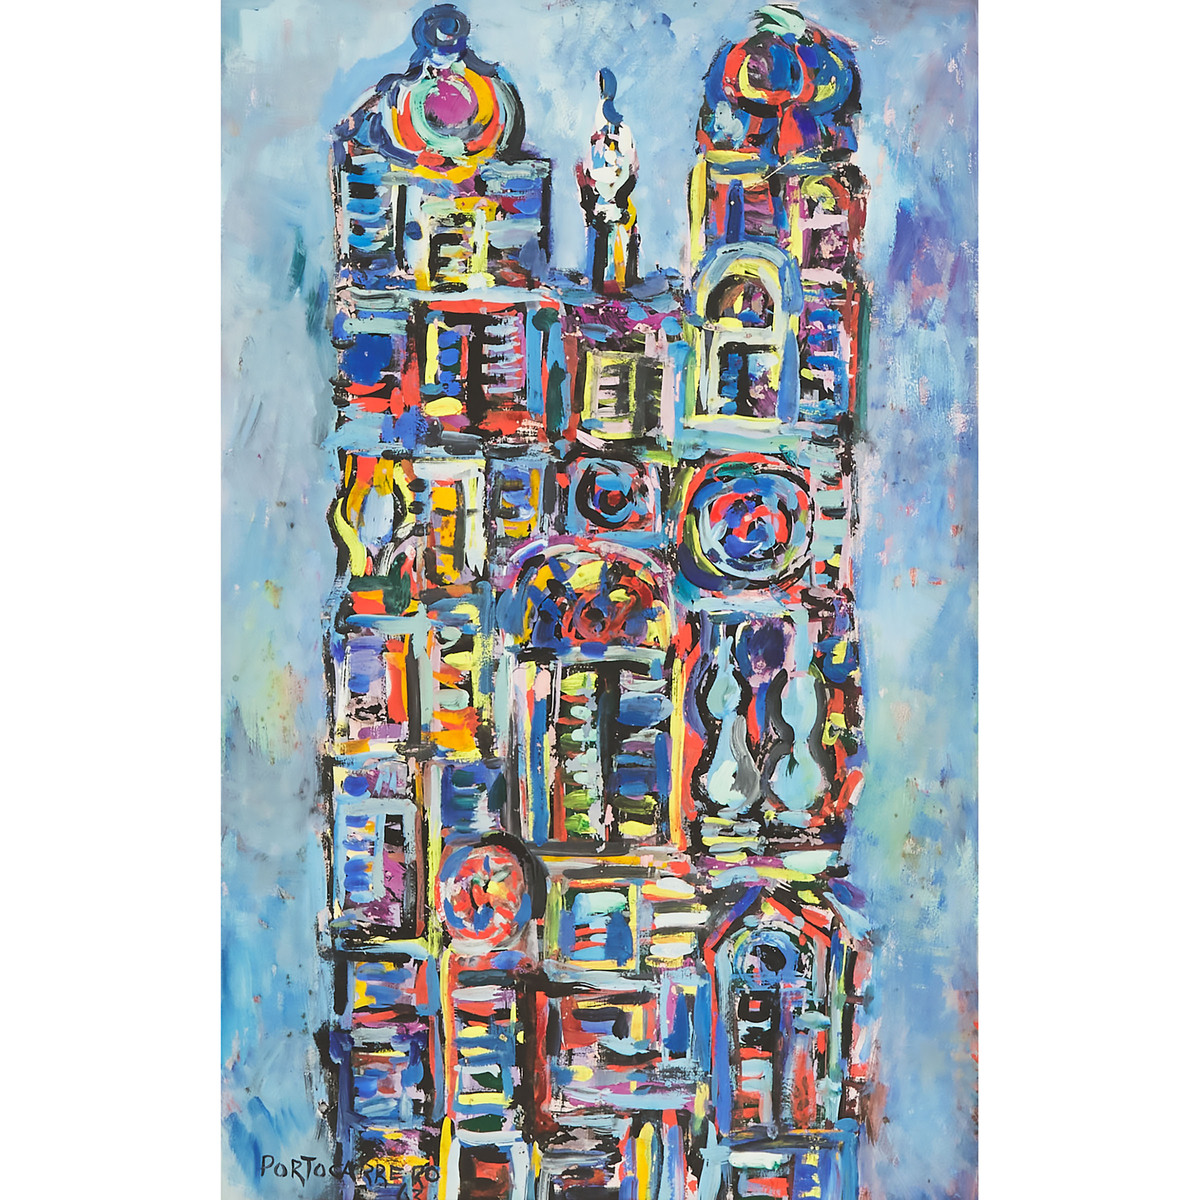 René Portocarrero (1912-1985), CATHEDRAL, 1963, signed and dated "63" lower left, sight 22.8 x 14.6